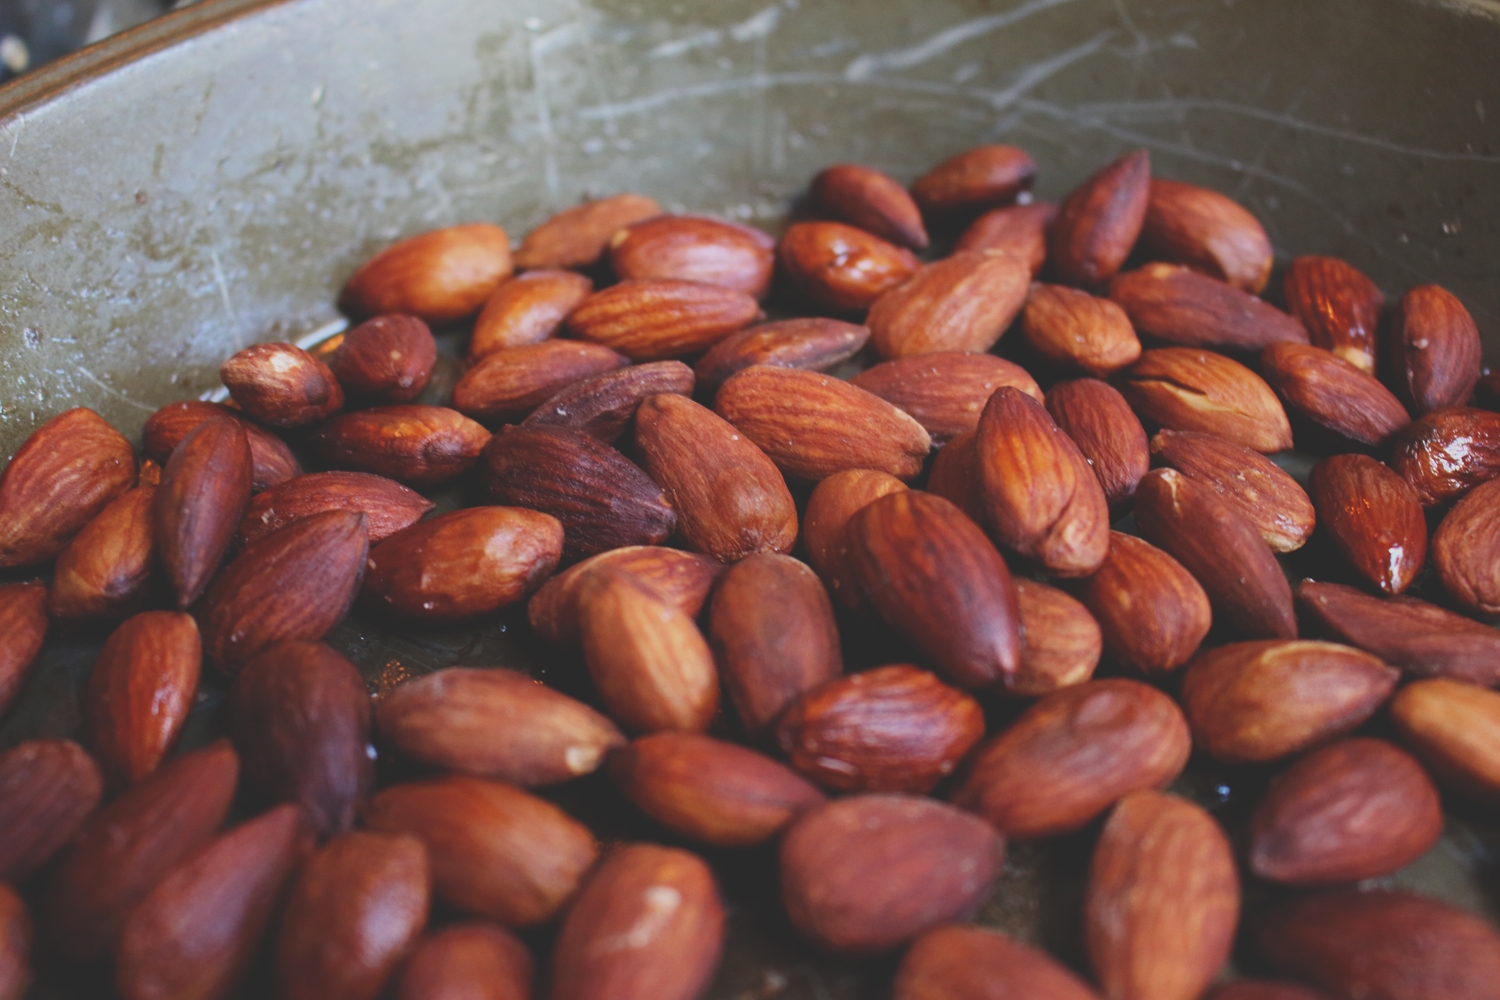 Baked Almonds